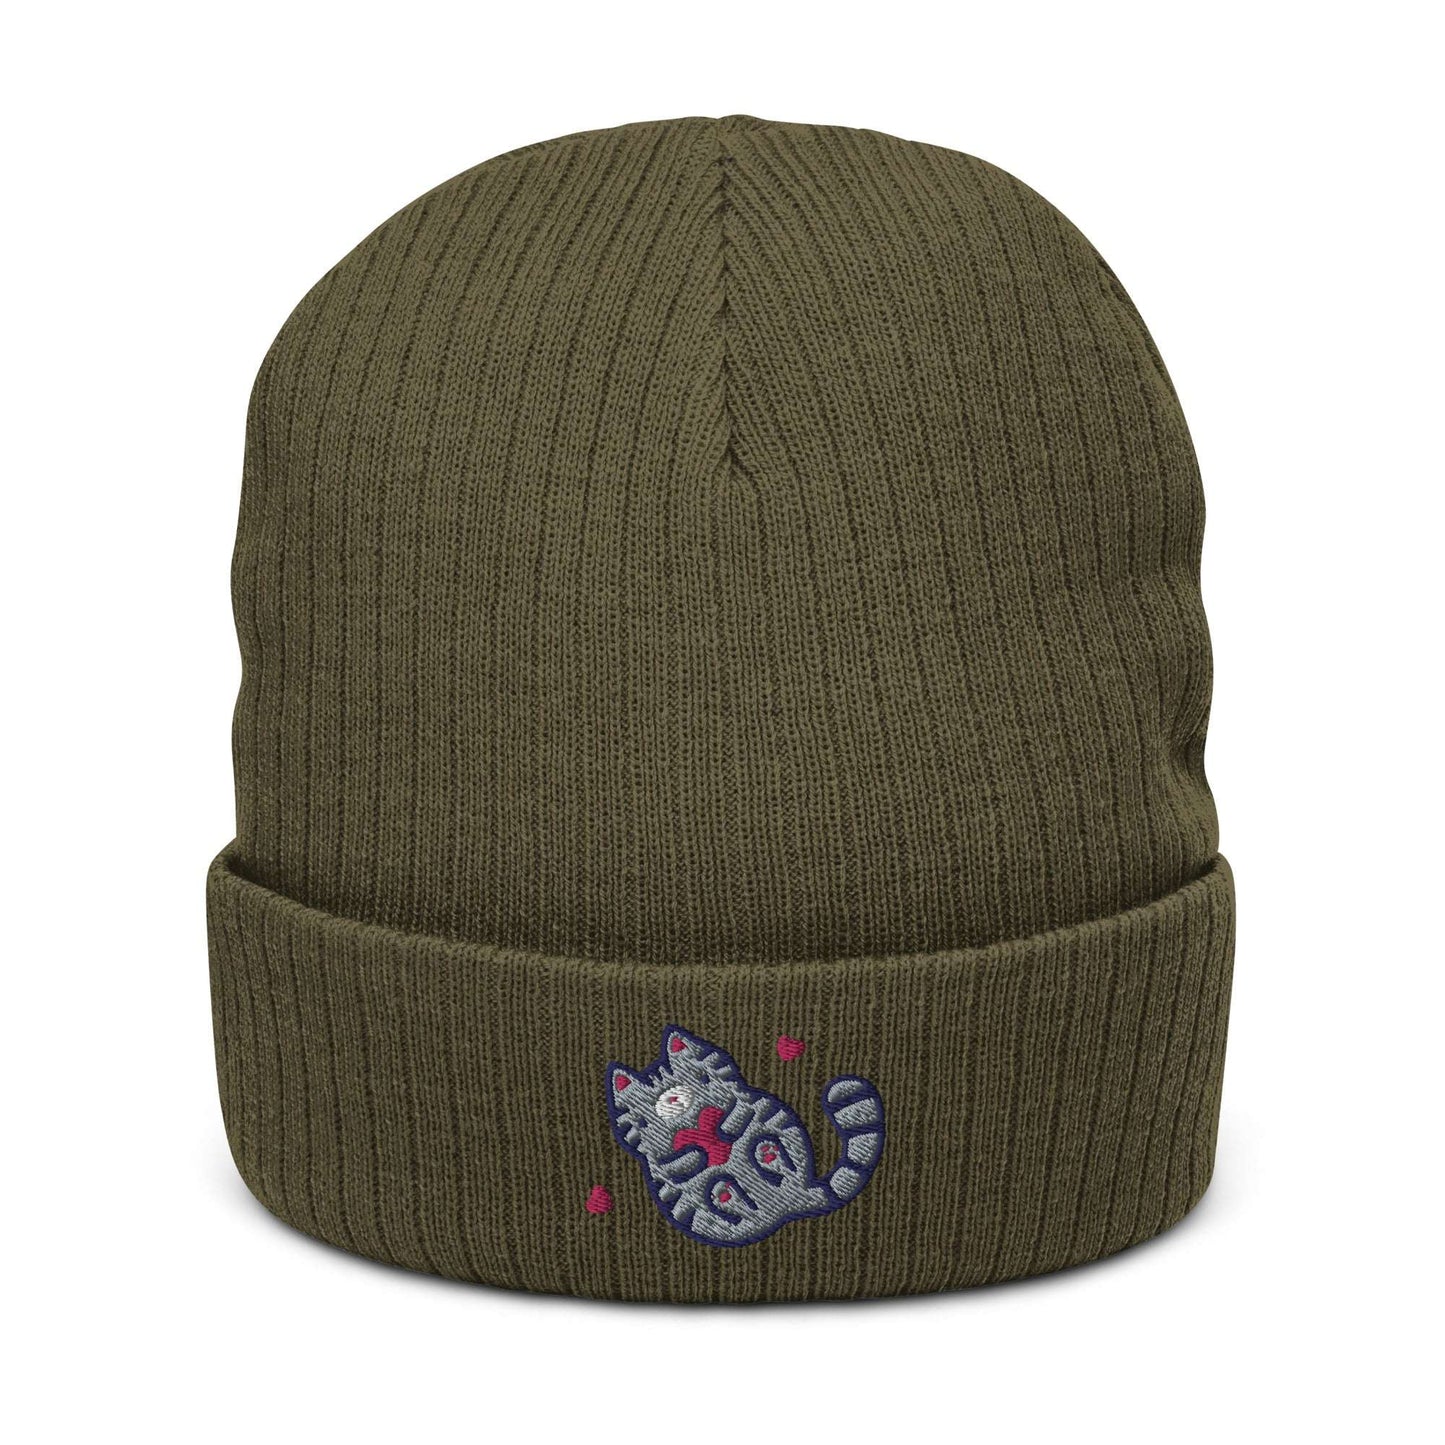 Ribbed Beanie with Embroidered Grey Tabby Cat. Unisex Toque: Olive